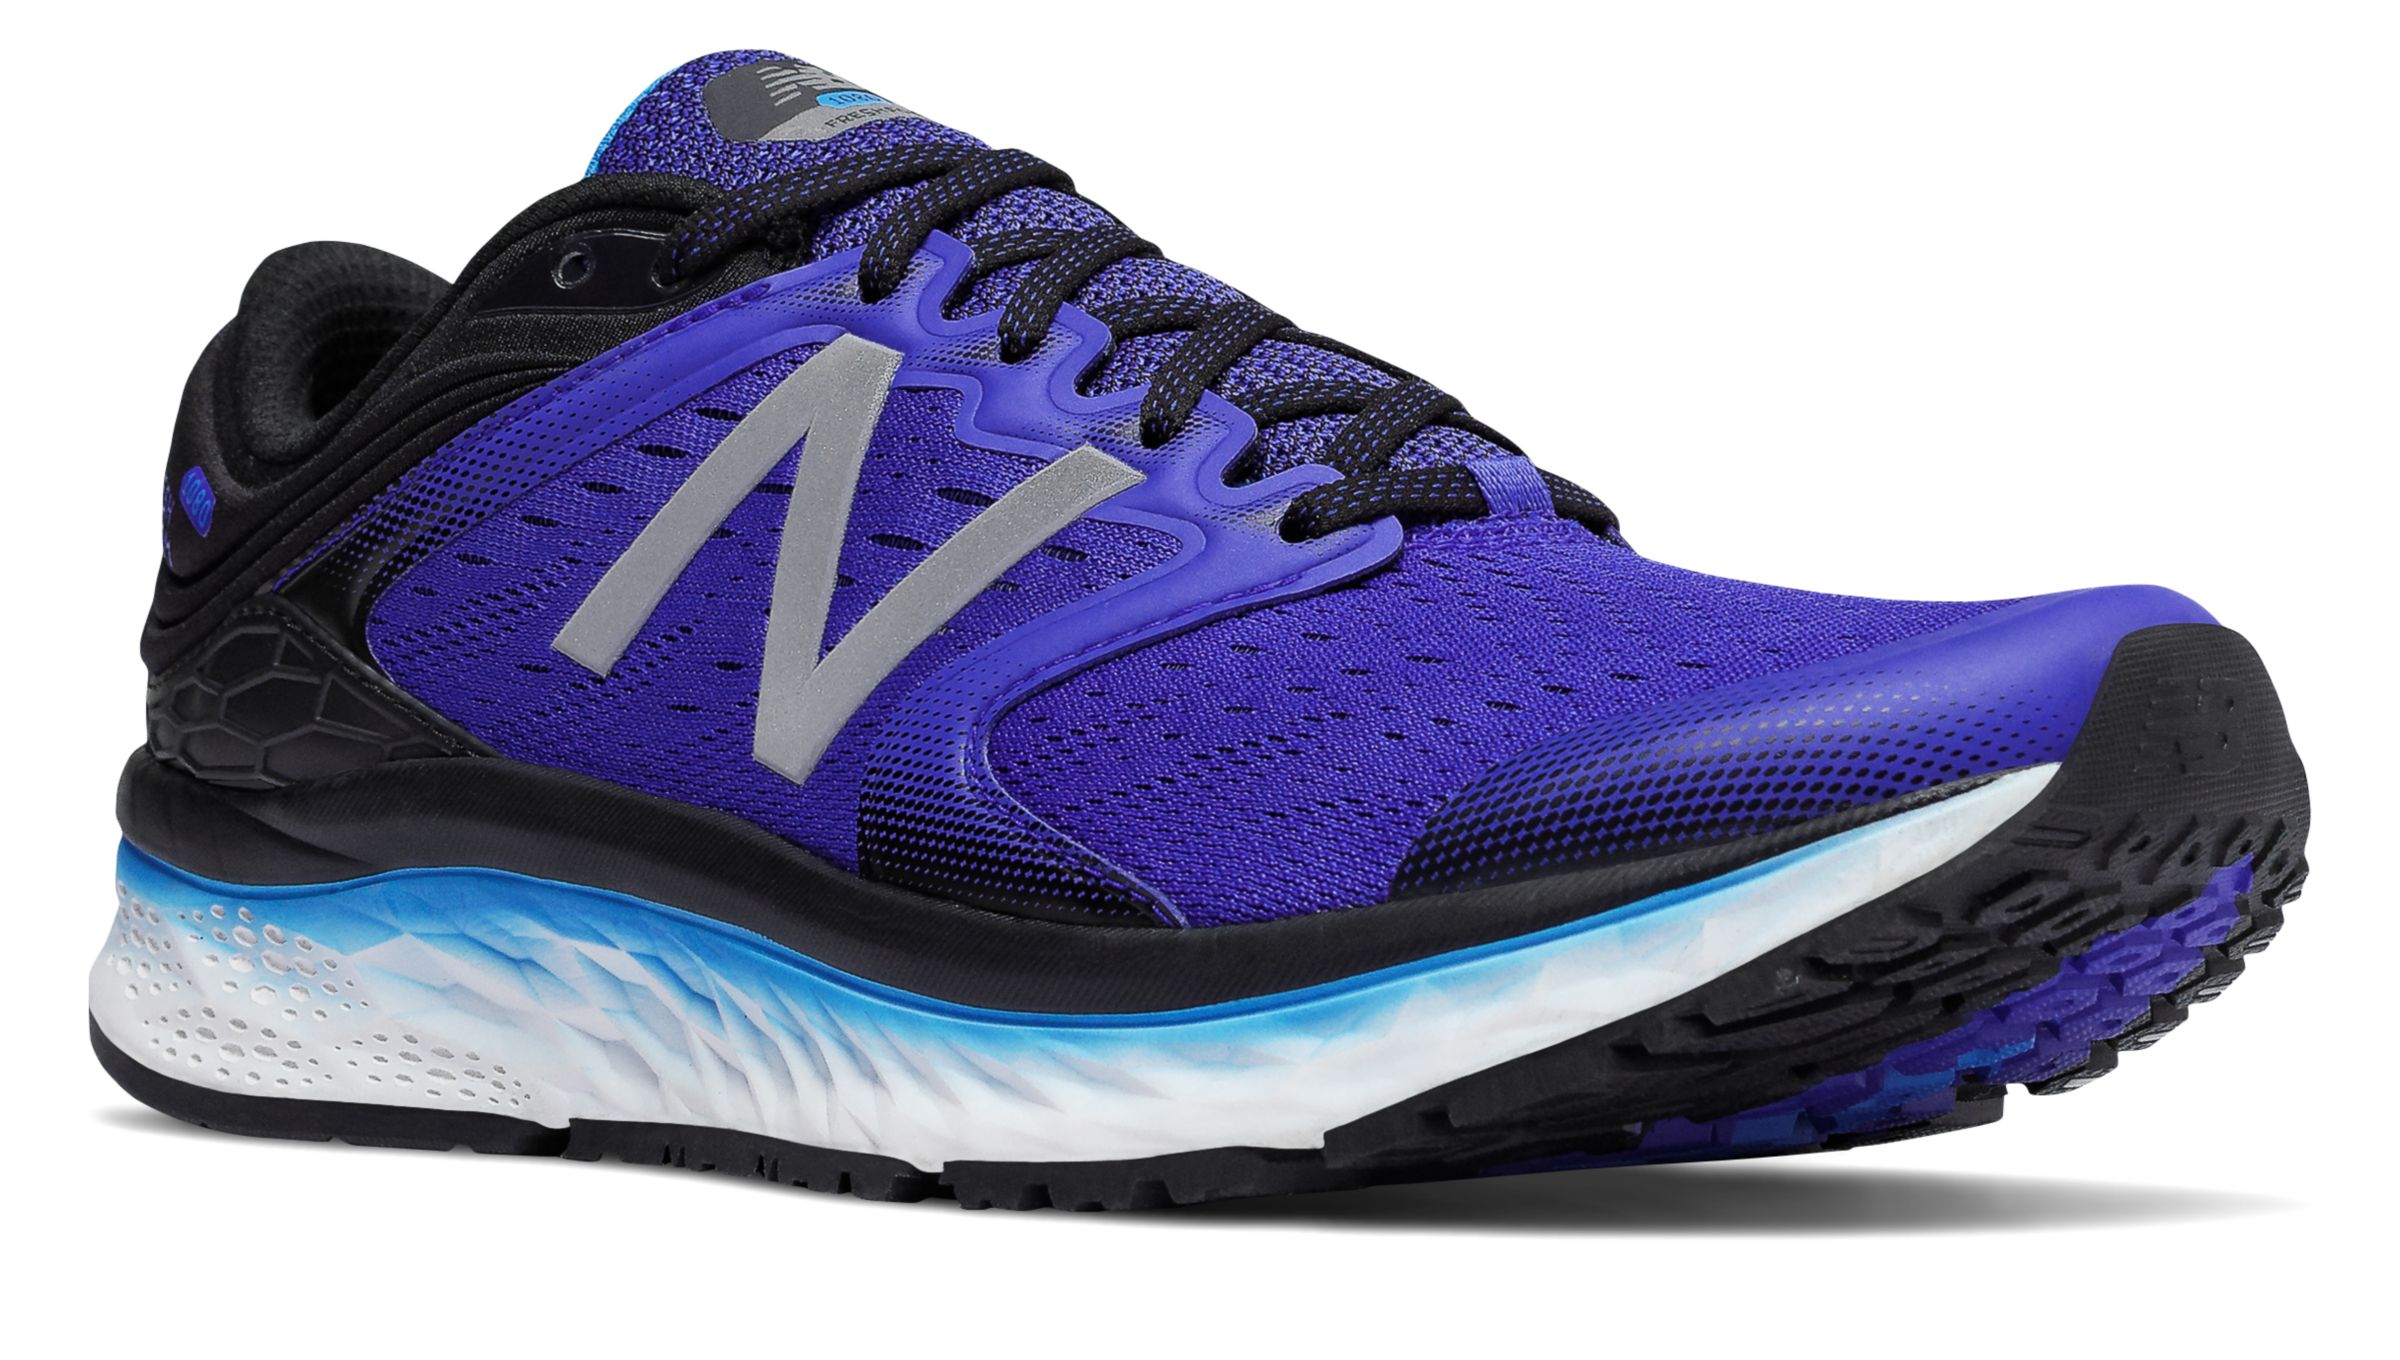 New Balance M1080-V8 on Sale - Discounts Up to 40% Off on M1080BB8 at Joe's New  Balance Outlet